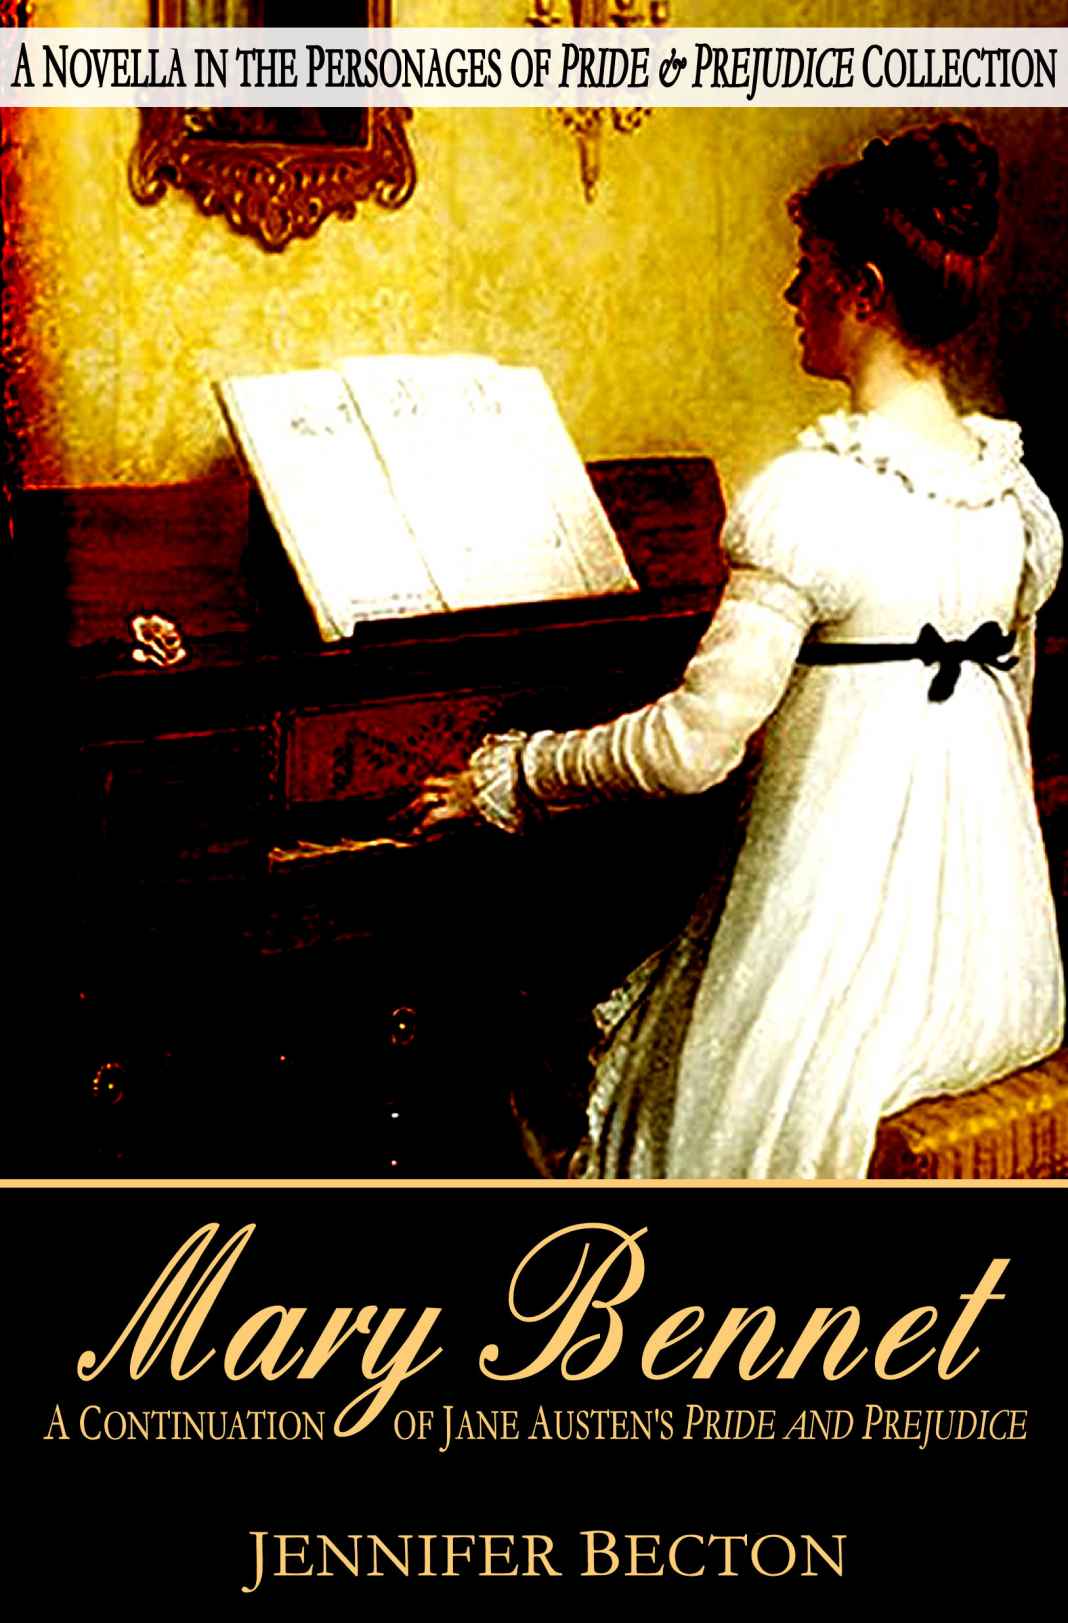 Mary Bennet: A Novella in the Personages of Pride & Prejudice Collection by Jennifer Becton